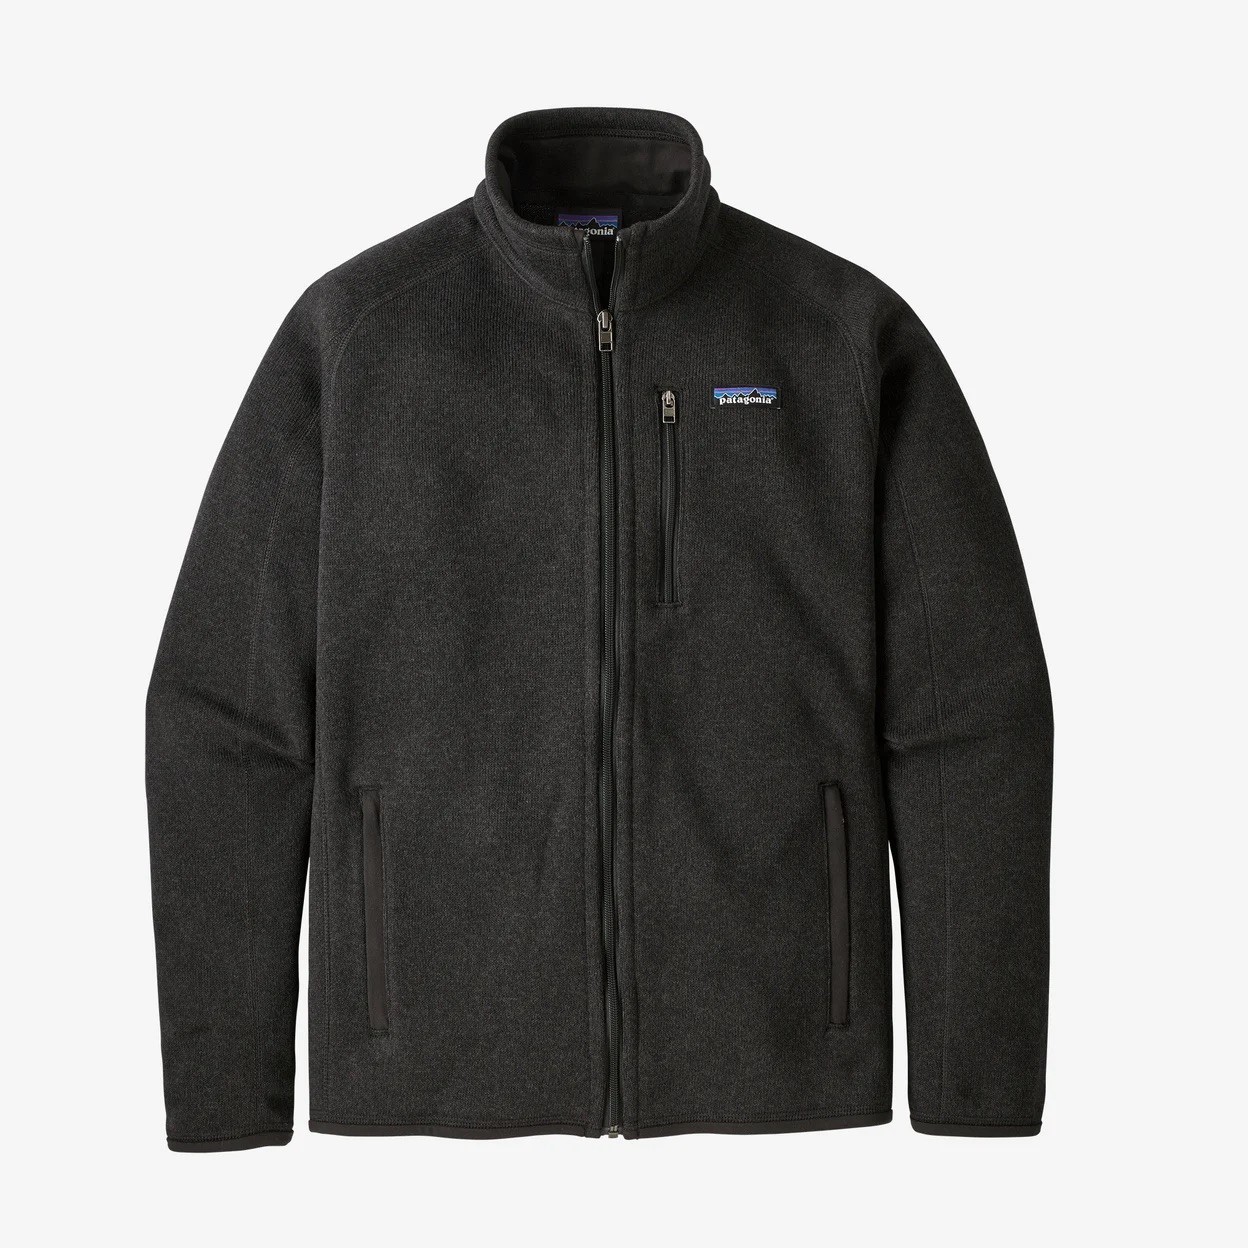 Patagonia M's Better Sweater Jacket - Nickel - Small